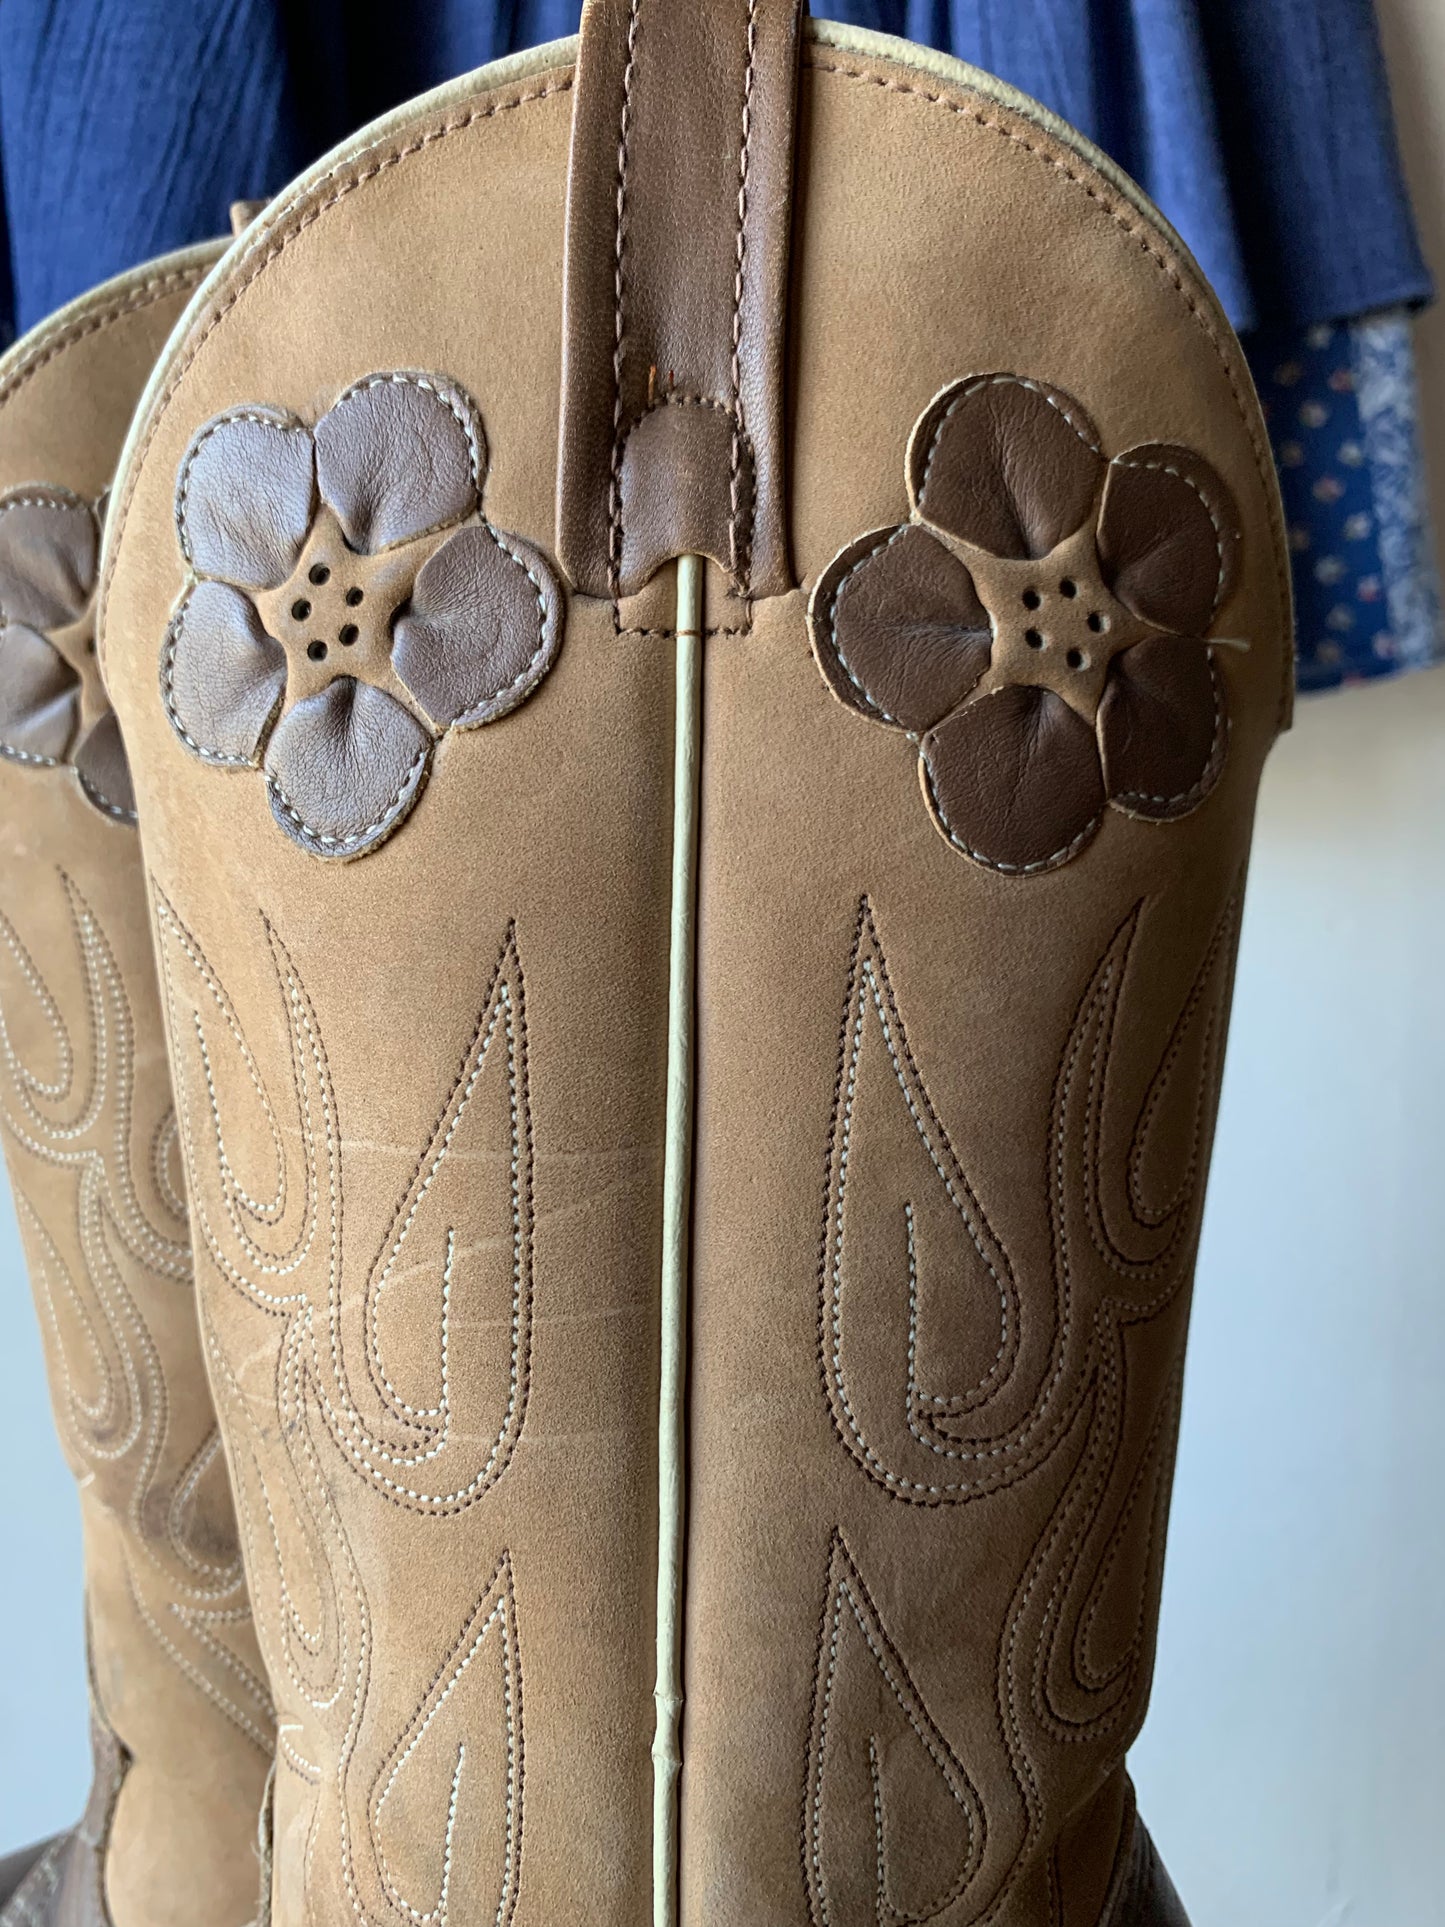 W6.5 Acme Flower Leather Western Cowboy Boots